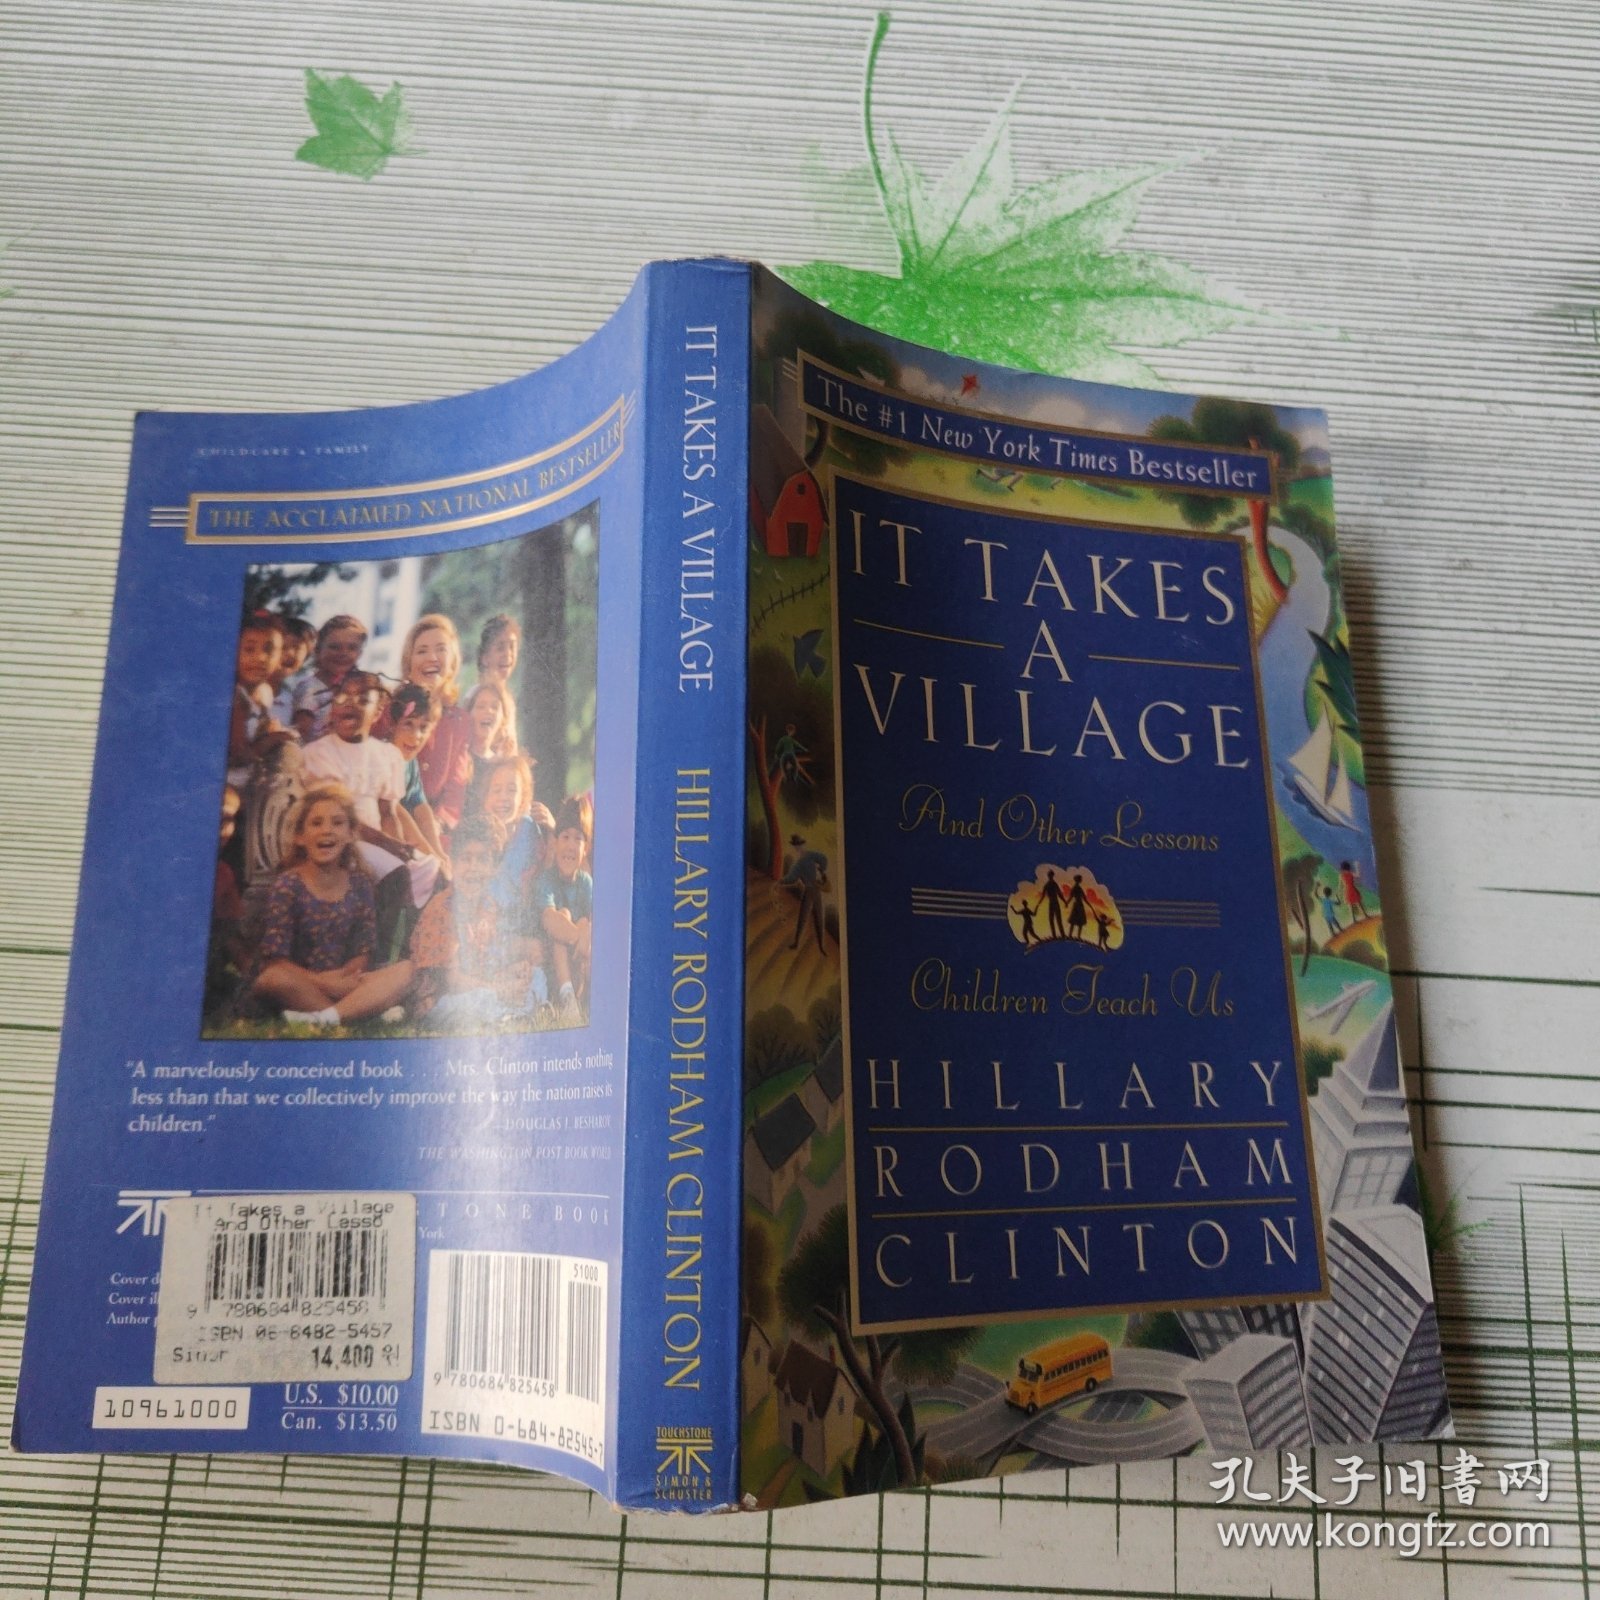 Hillary Rodham Clinton:It Takes A Village: And Other Lessons Children Teach Us